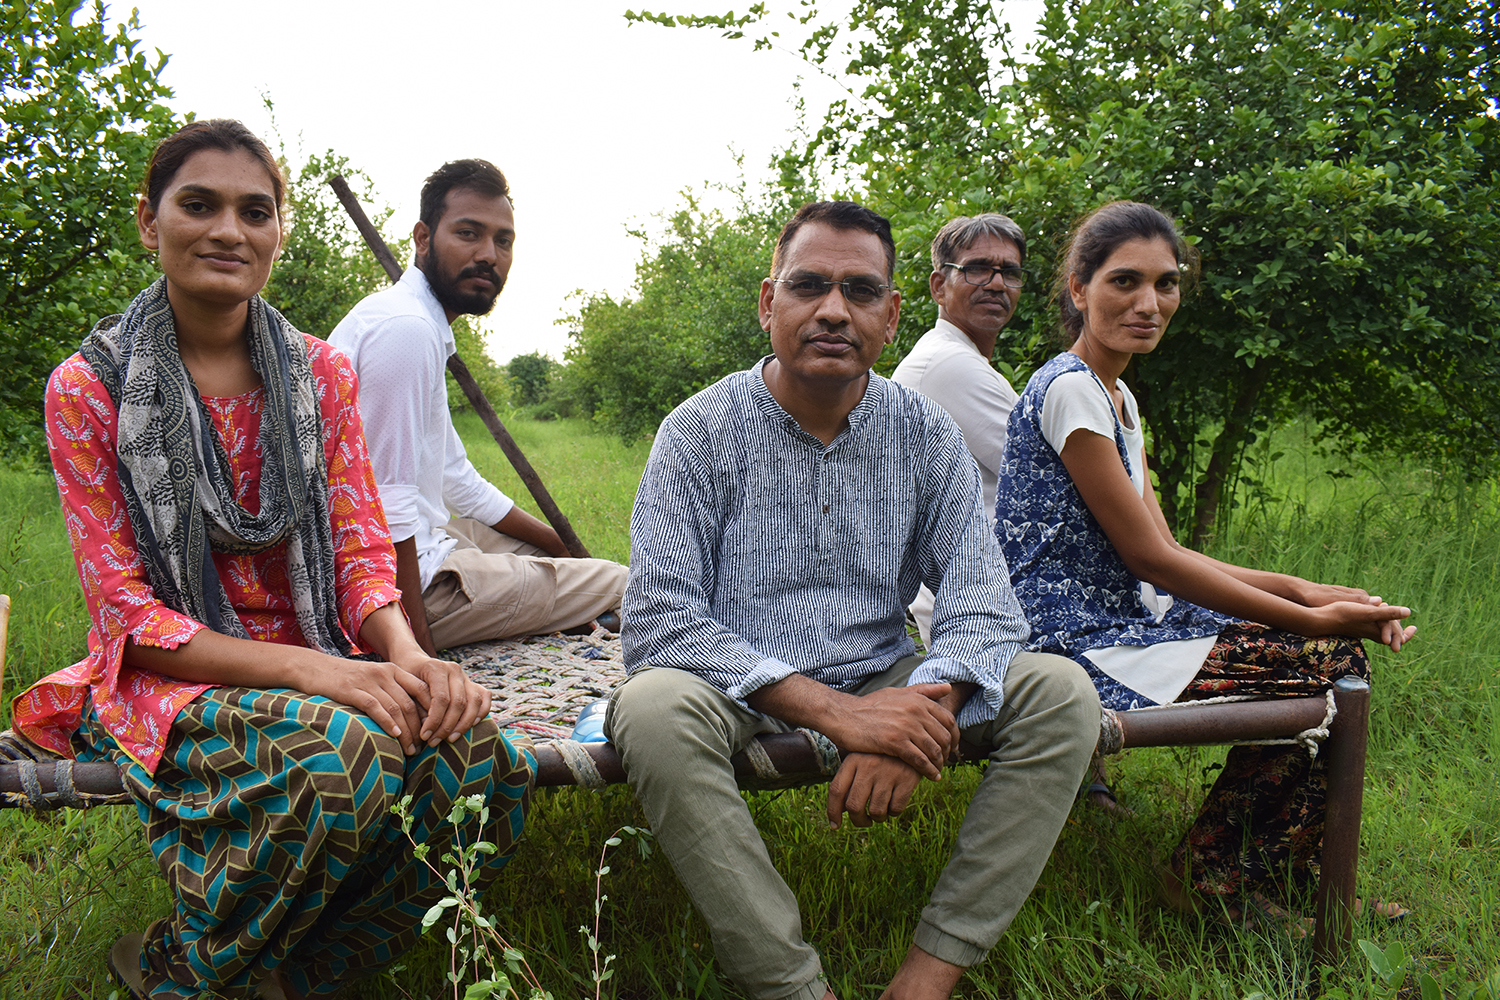 Social activist and writer Bhanwar Meghwanshi with his family at their farm in Rajasthan, India, last August. Photo by Priyadarshini Sen